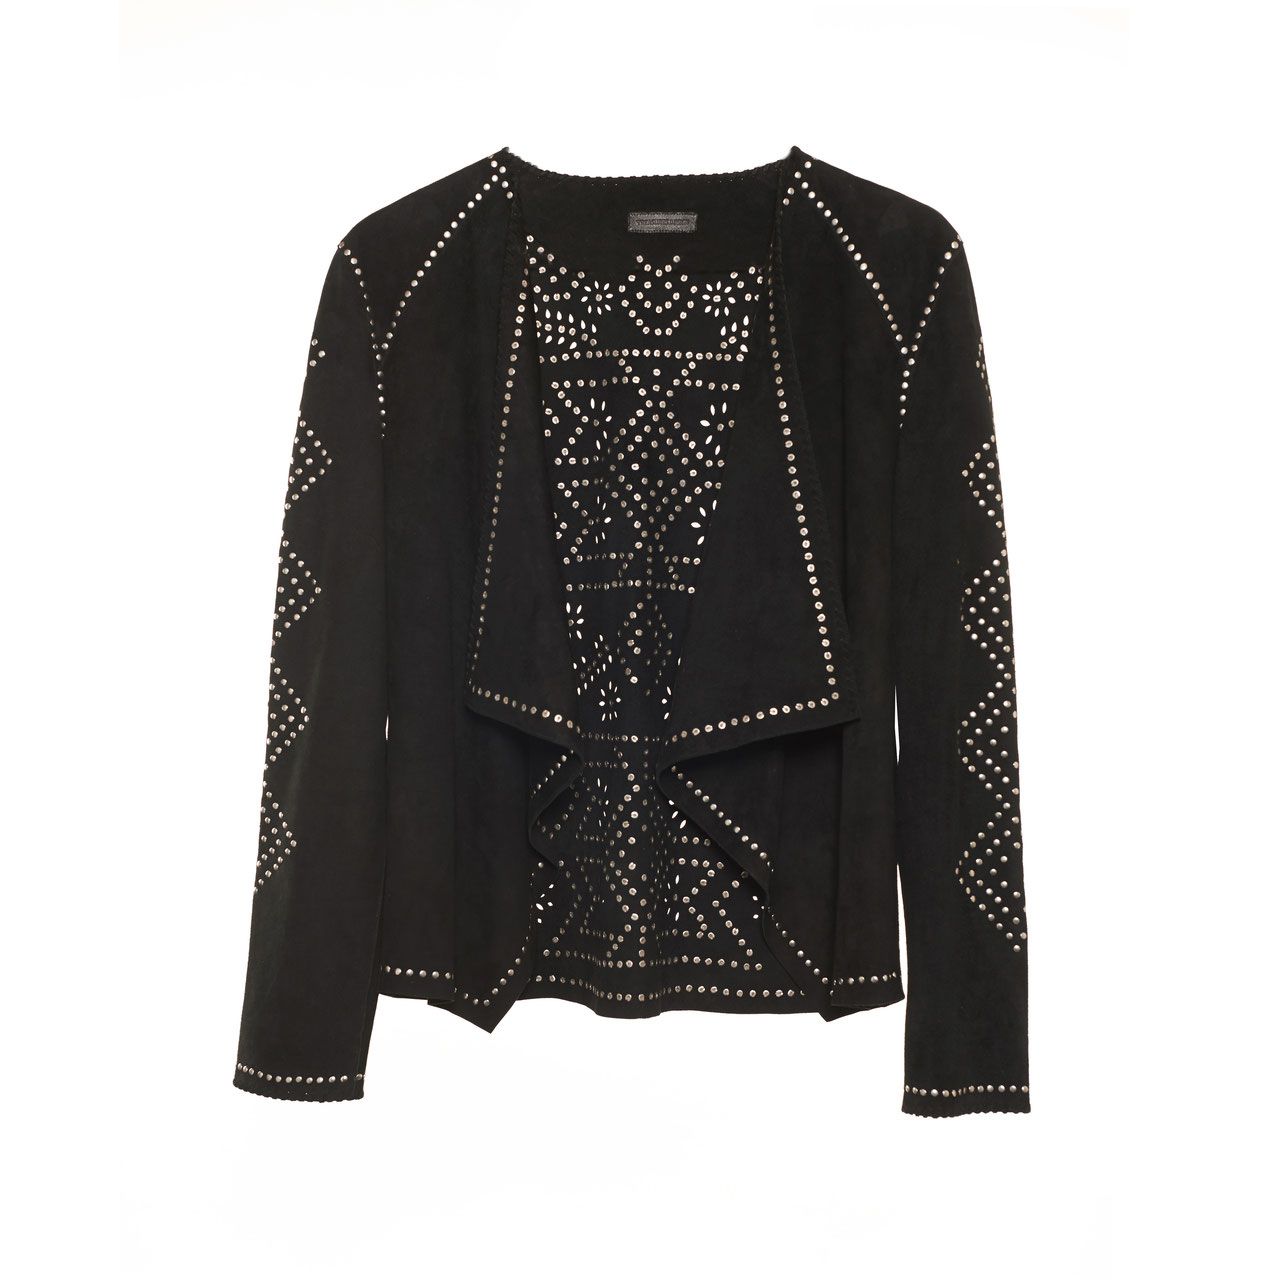 Stevie suede moto jacket with studs - black - Bohemian luxe suede ...